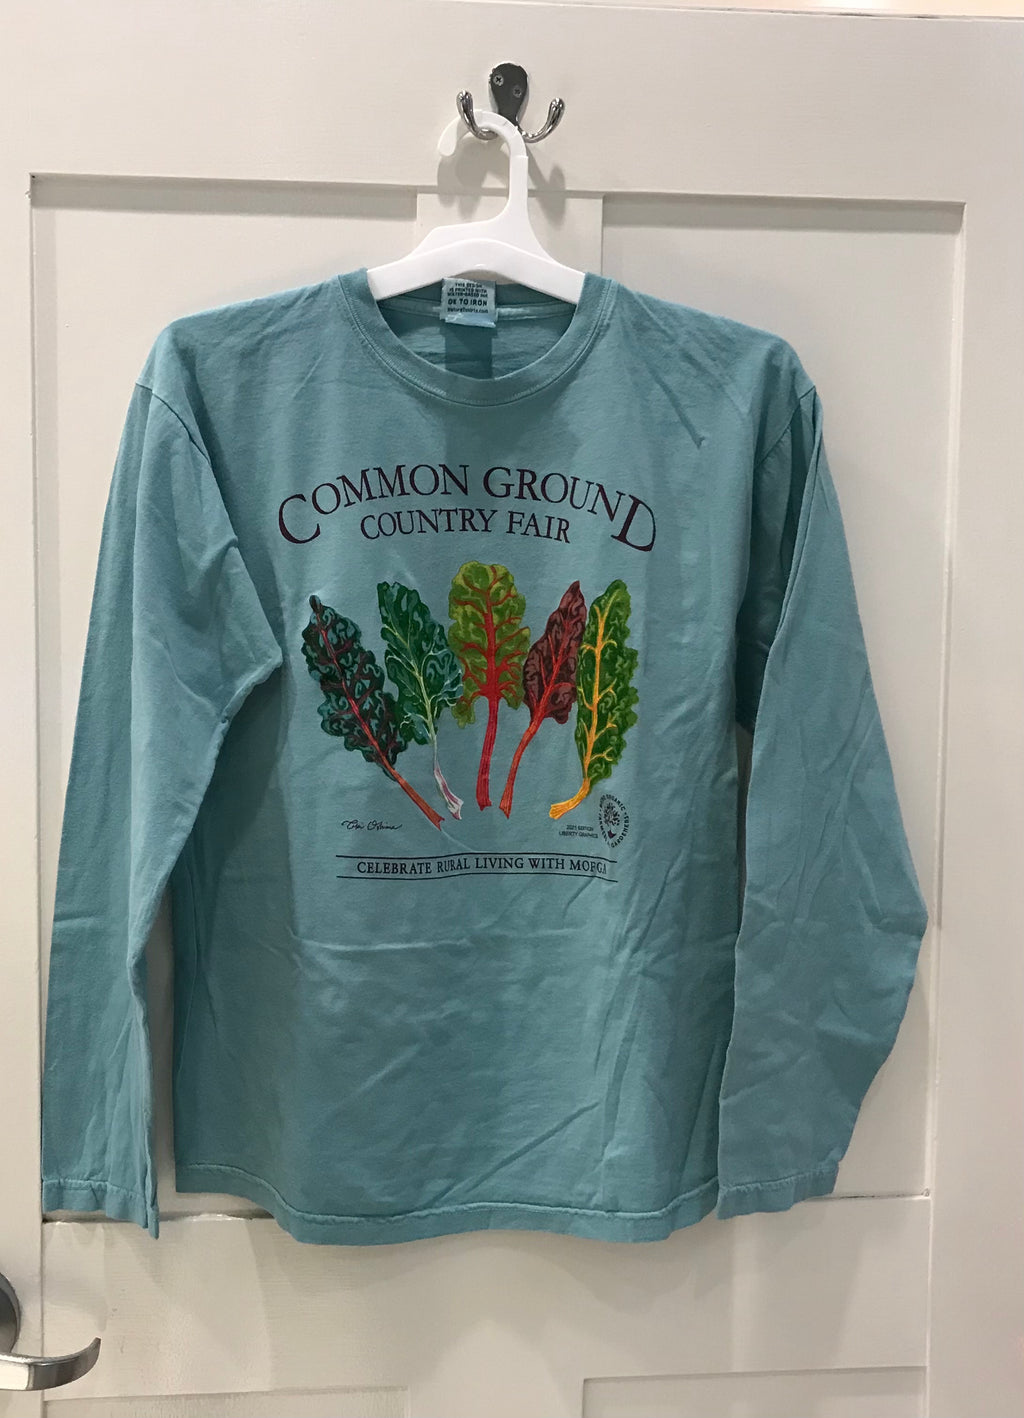 A light blue long sleeve shirt with artwork in the center depicting a colorful splay of five green, yellow, red, and purple chard. Black text around art reads “Common Ground Country Fair” and  “Celebrate Rural Living with MOFGA”. A black MOFGA logo is in the bottom right corner. 